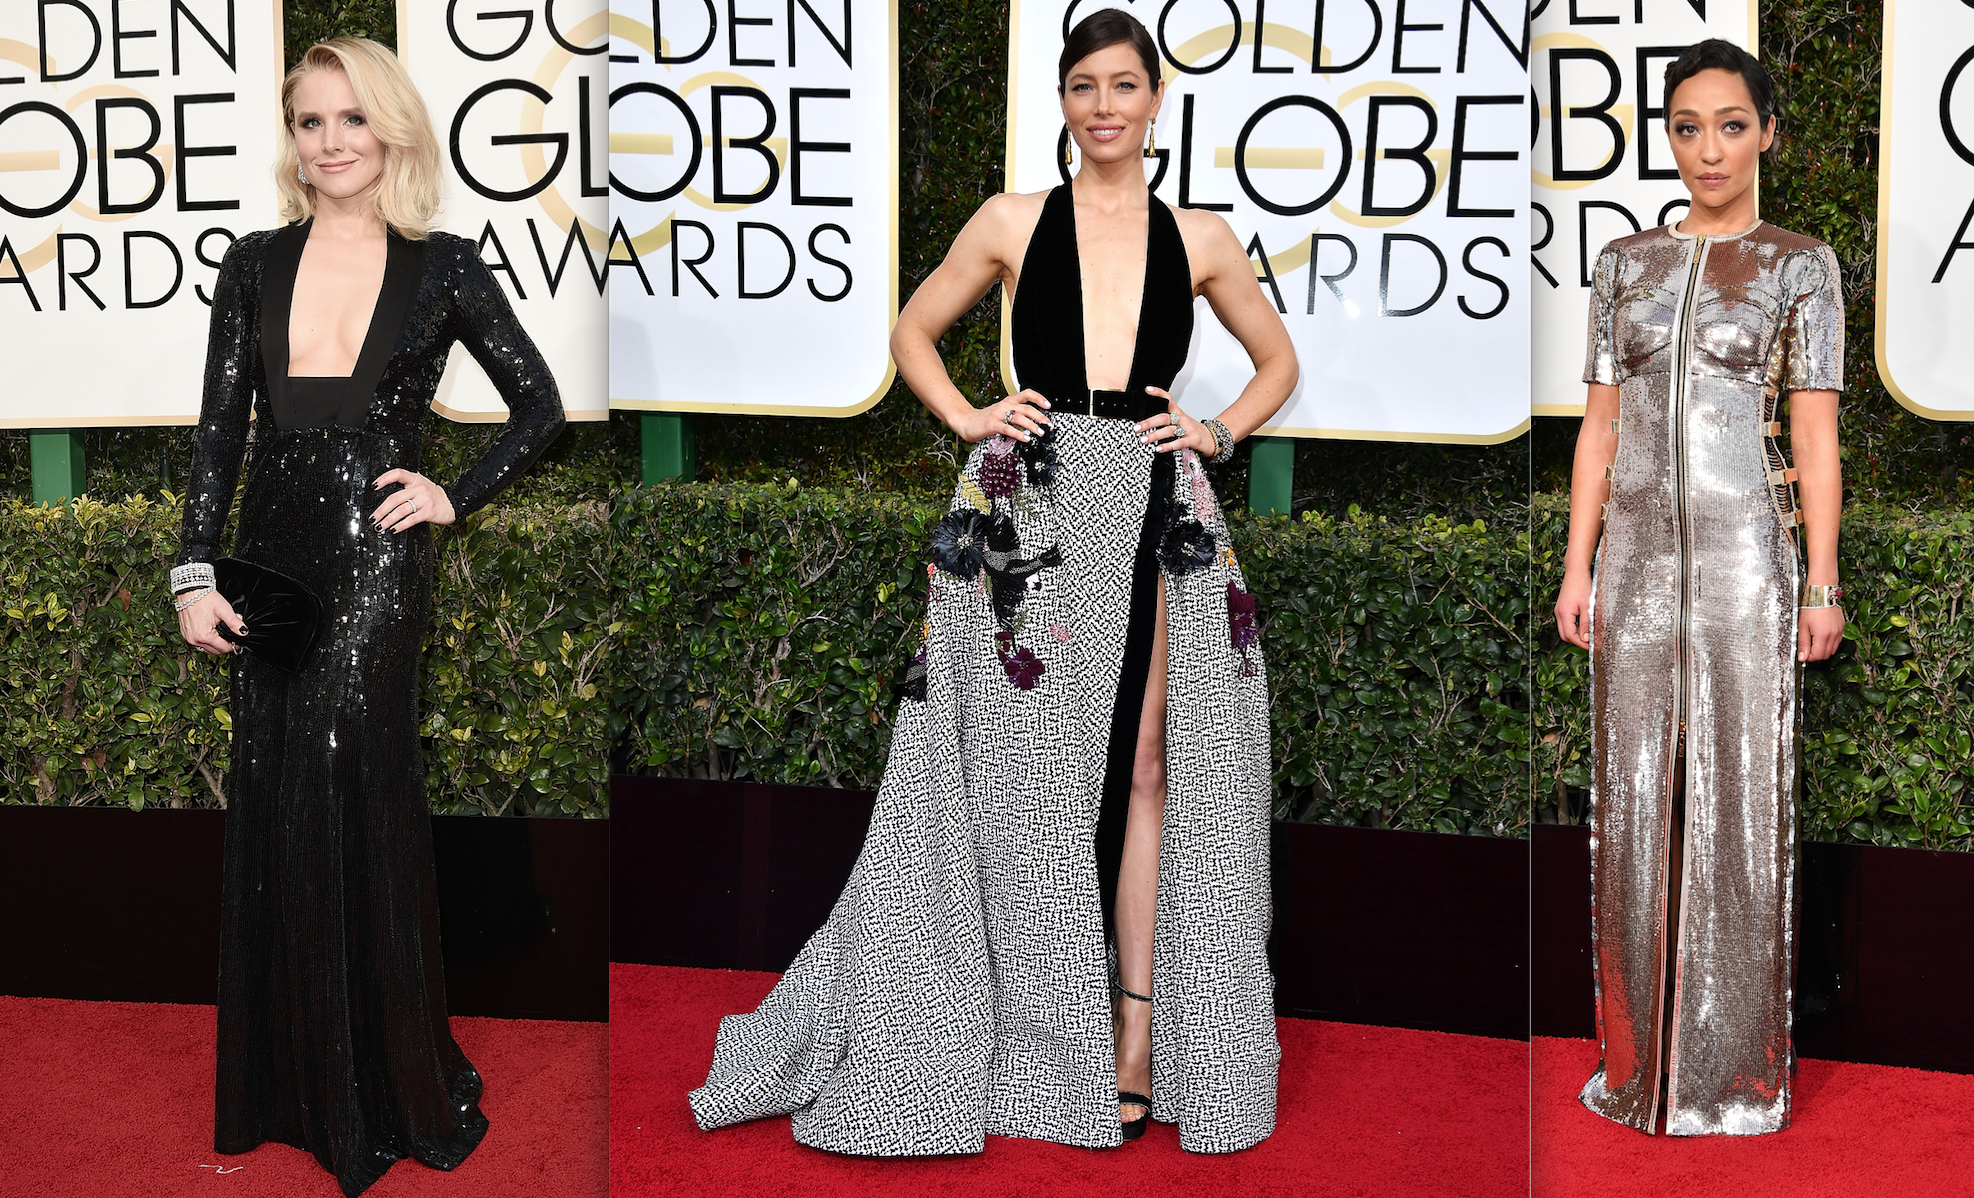 The Best of The Golden Globes 2017 Red Carpet - Daily Front Row